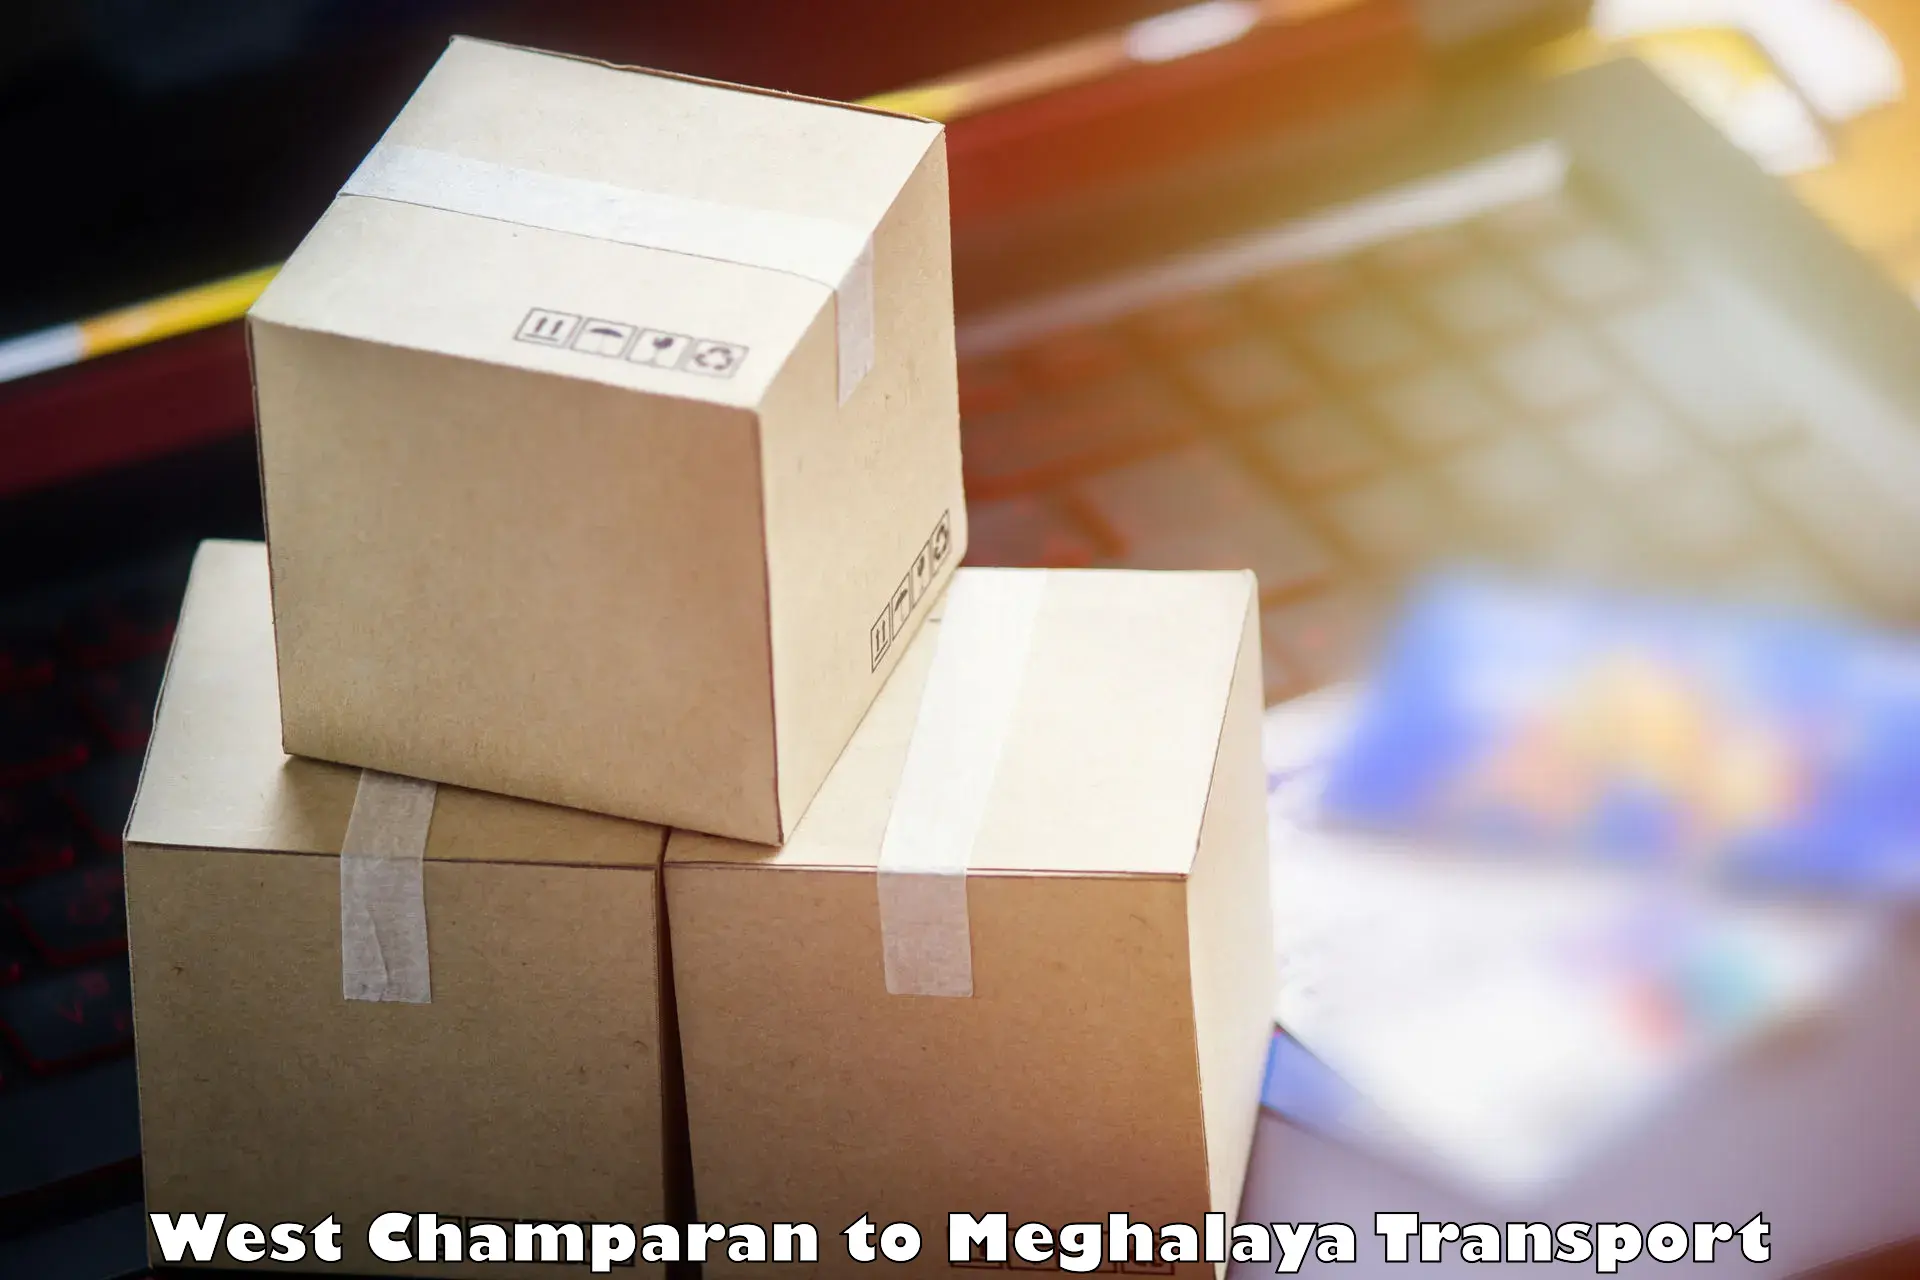 Truck transport companies in India West Champaran to Shillong